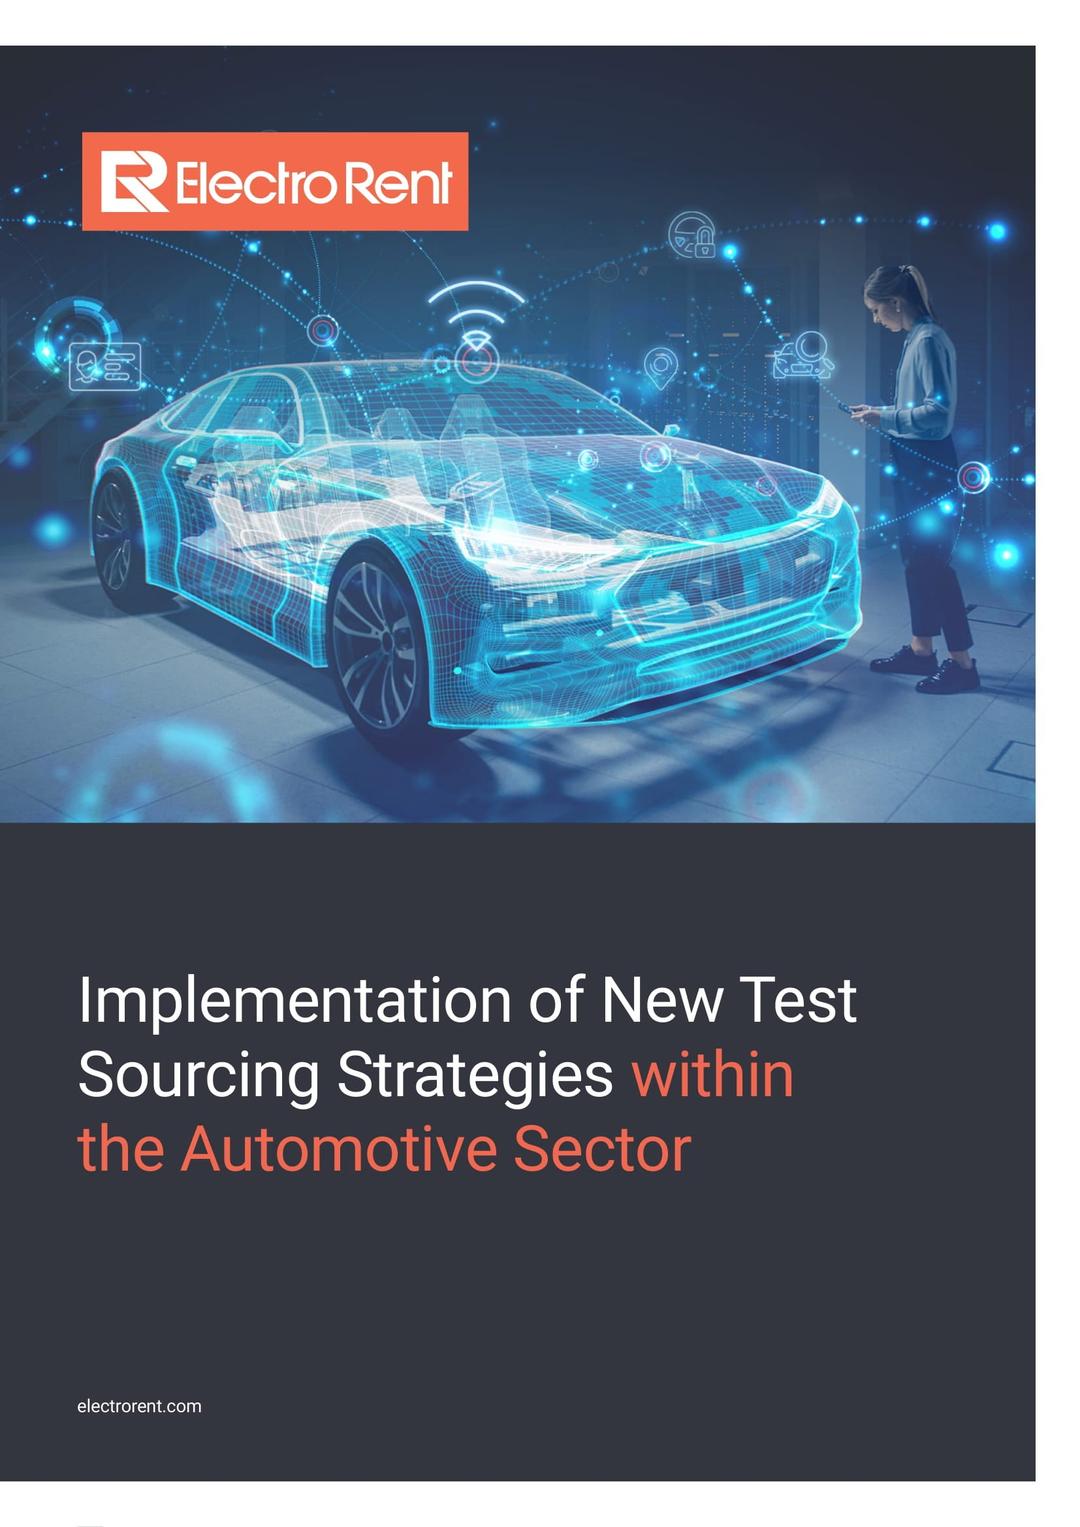 New Test Sourcing Strategies within the Automotive Sector, image